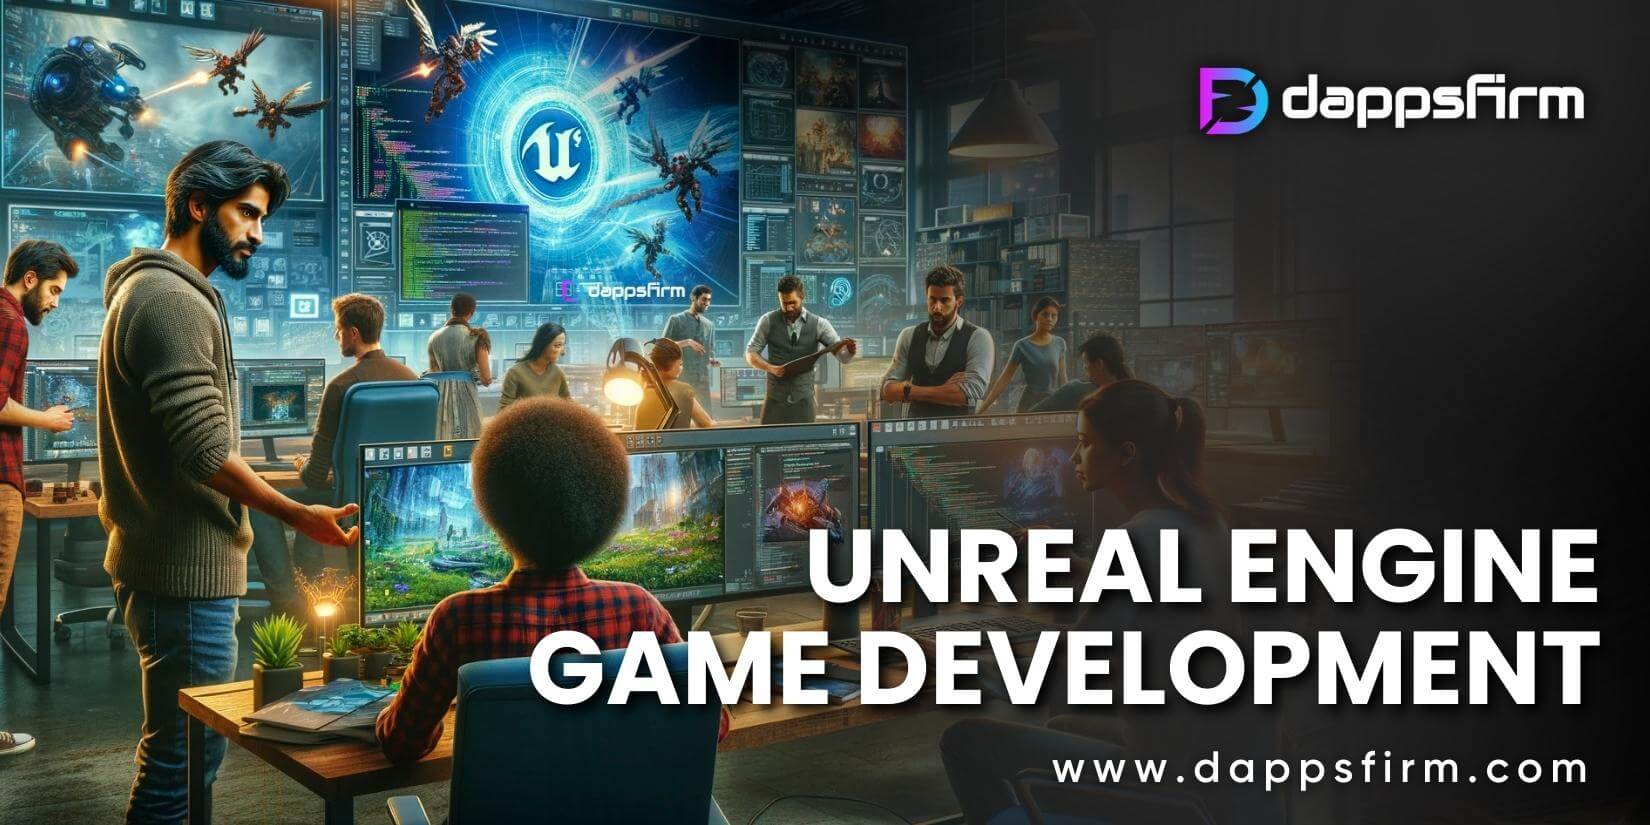 How a Game Development Studio Can Bring Your Game Idea to Life